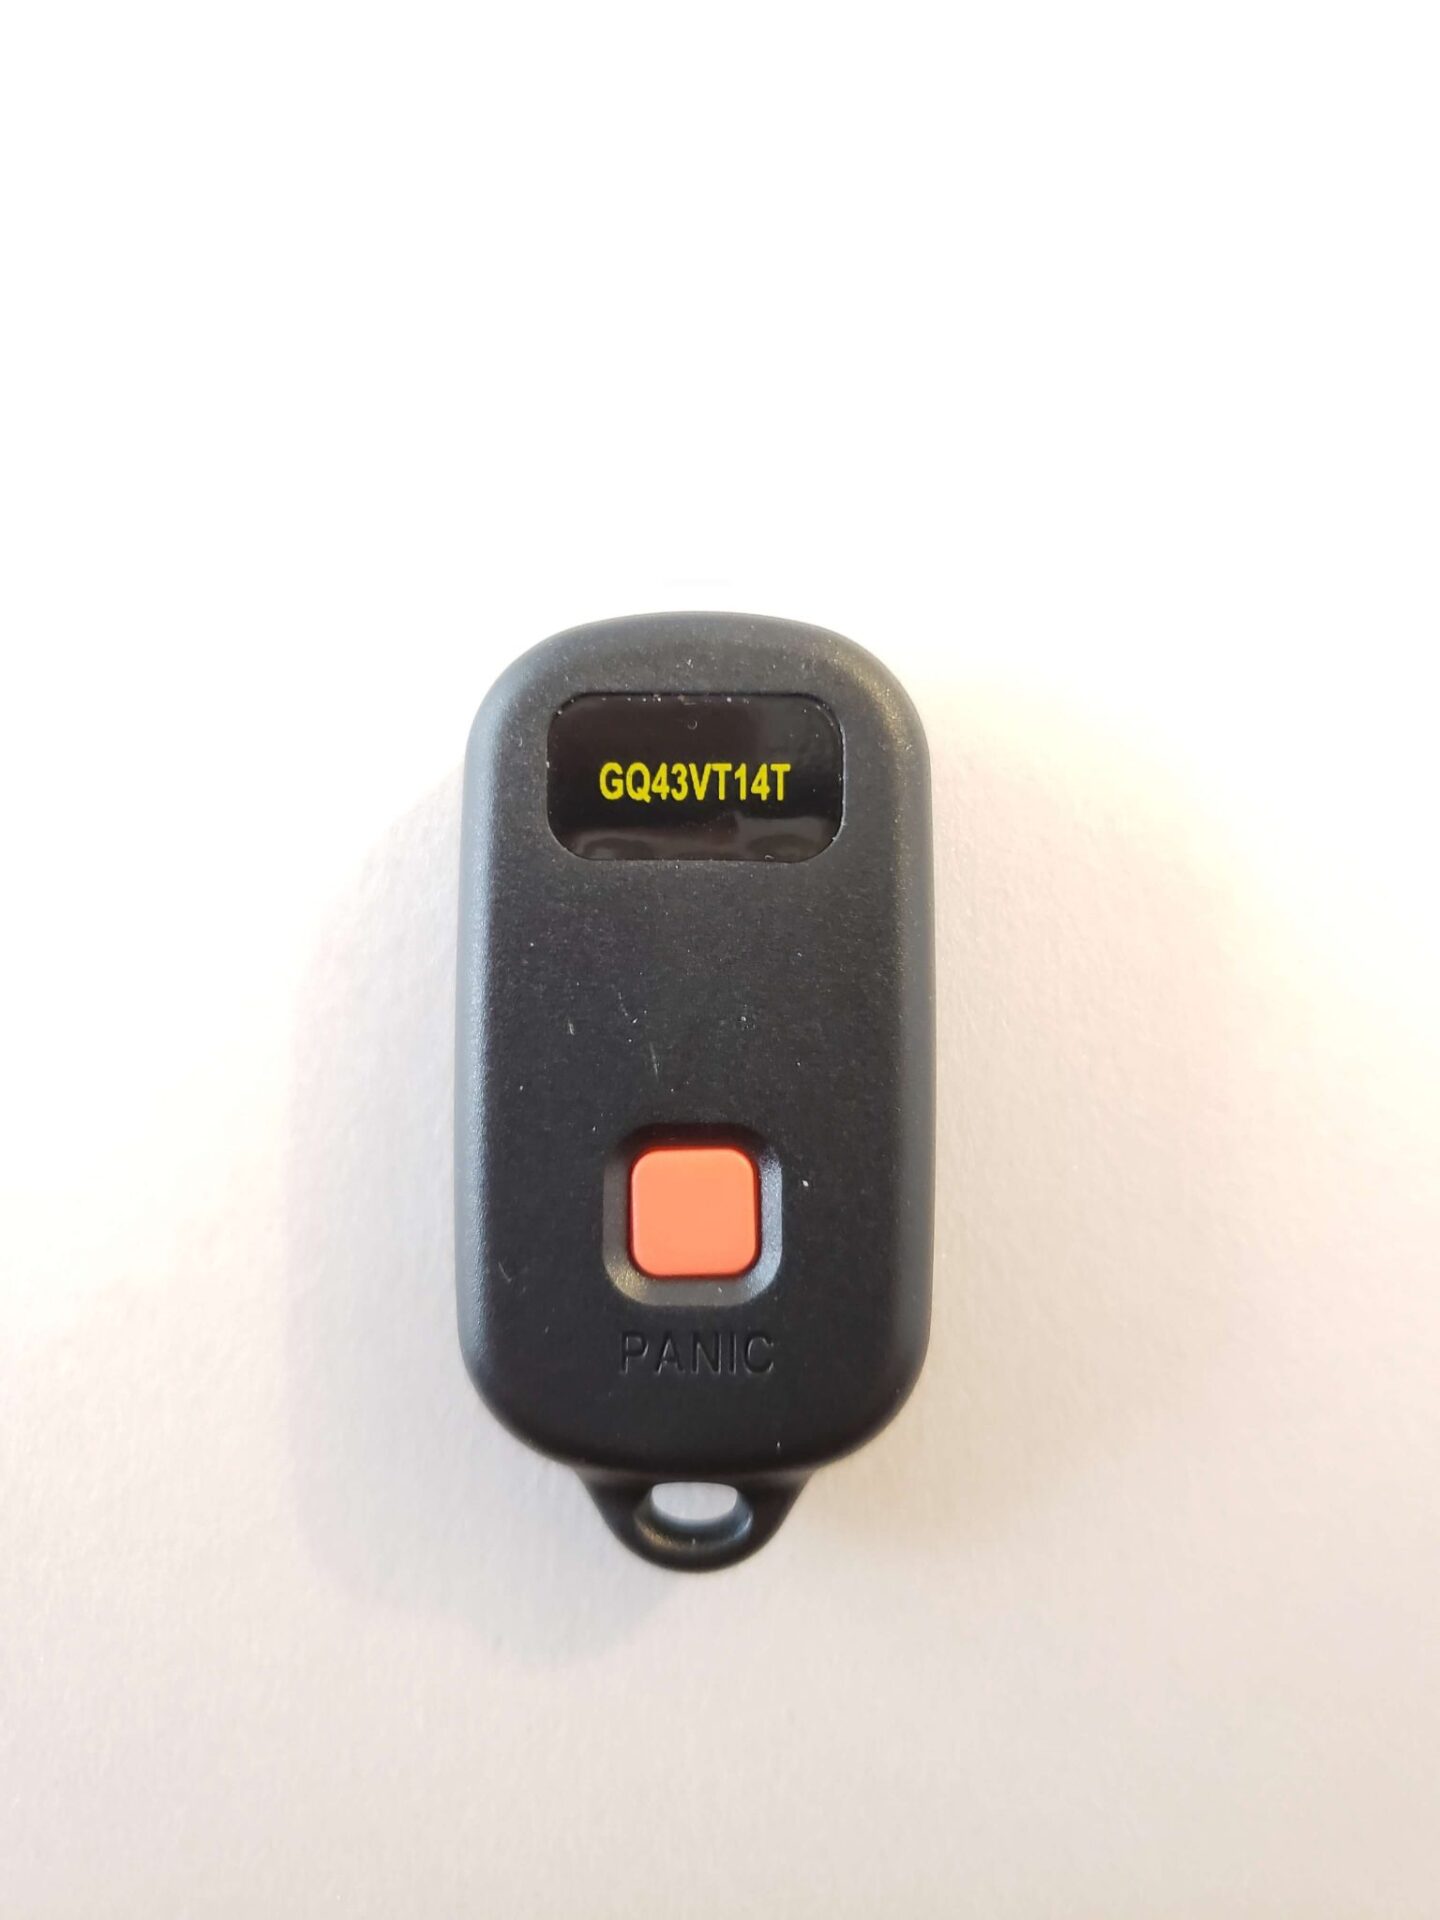 Toyota Keyless Entry System & Remotes. All You Need to Know.